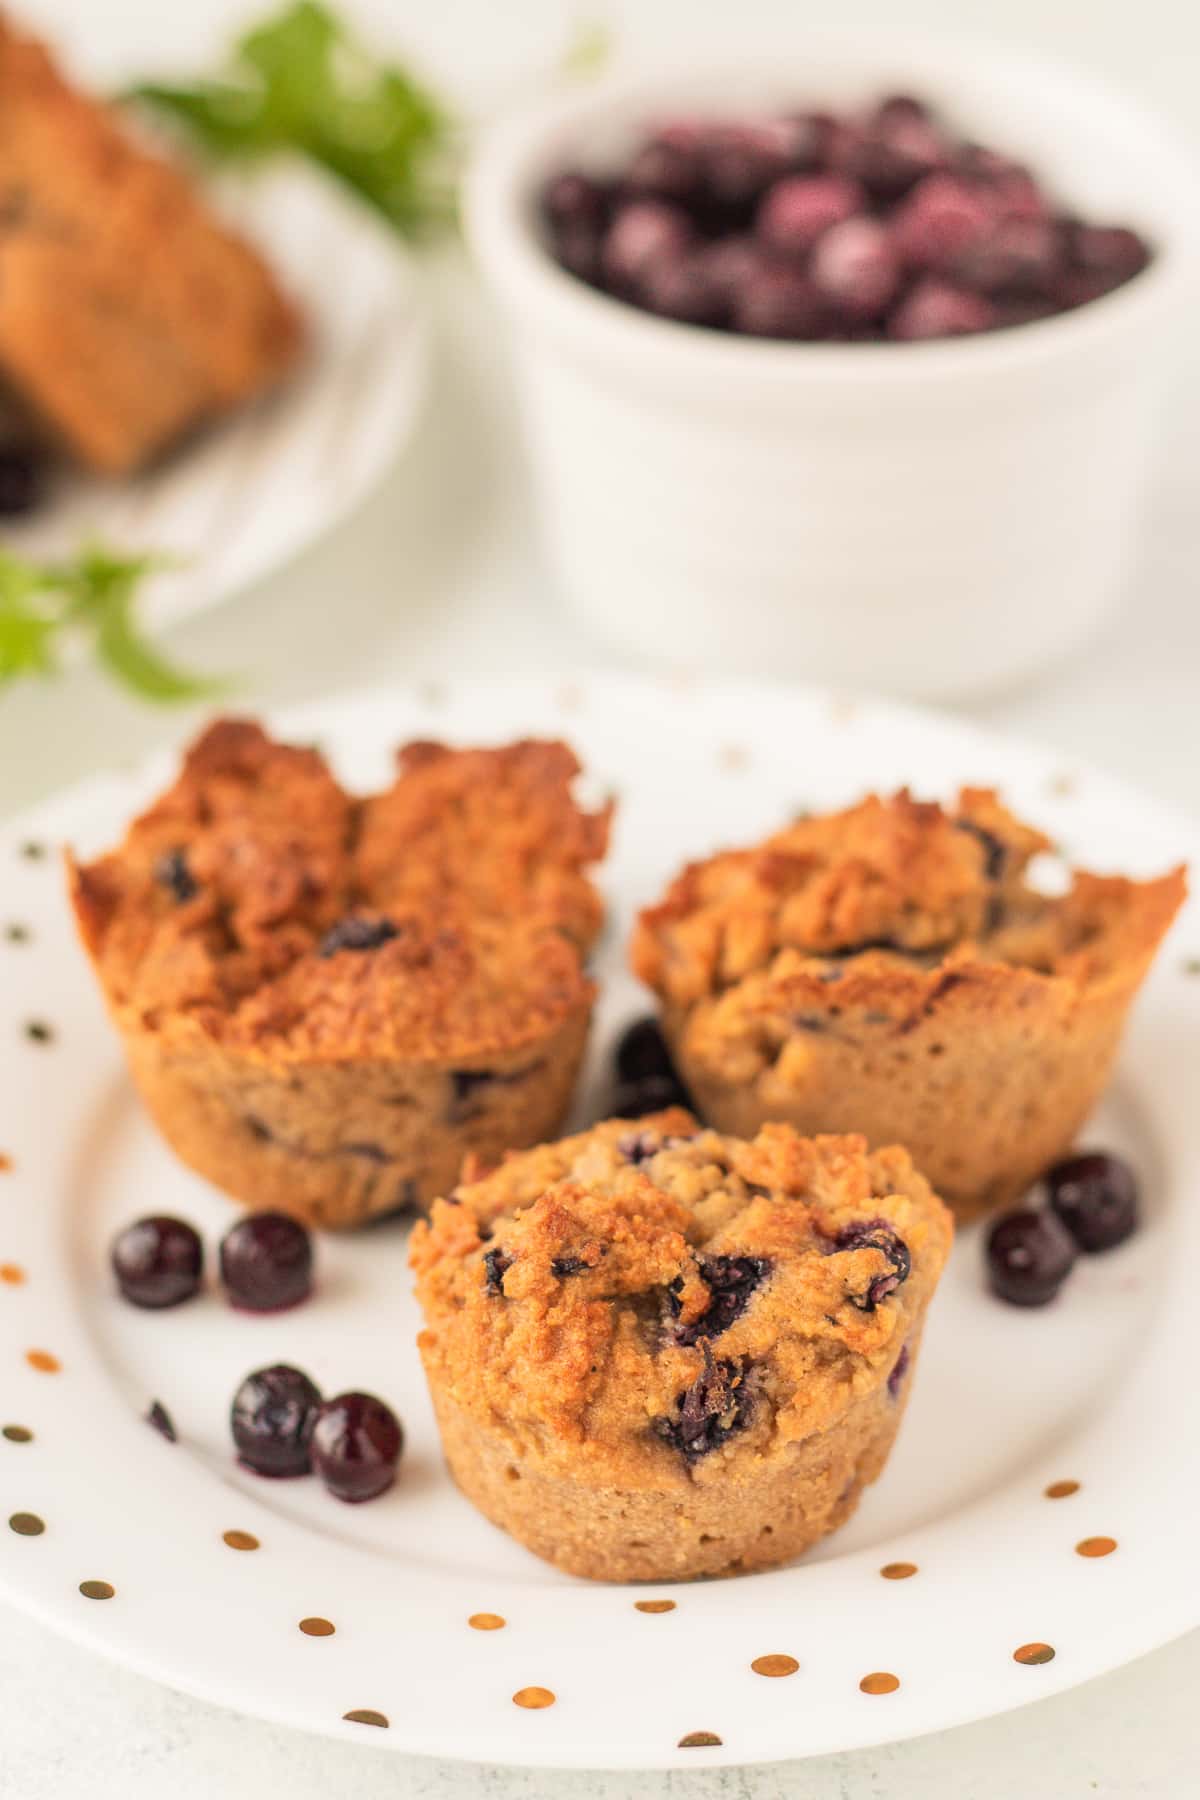 warm blueberry muffins ready to eat